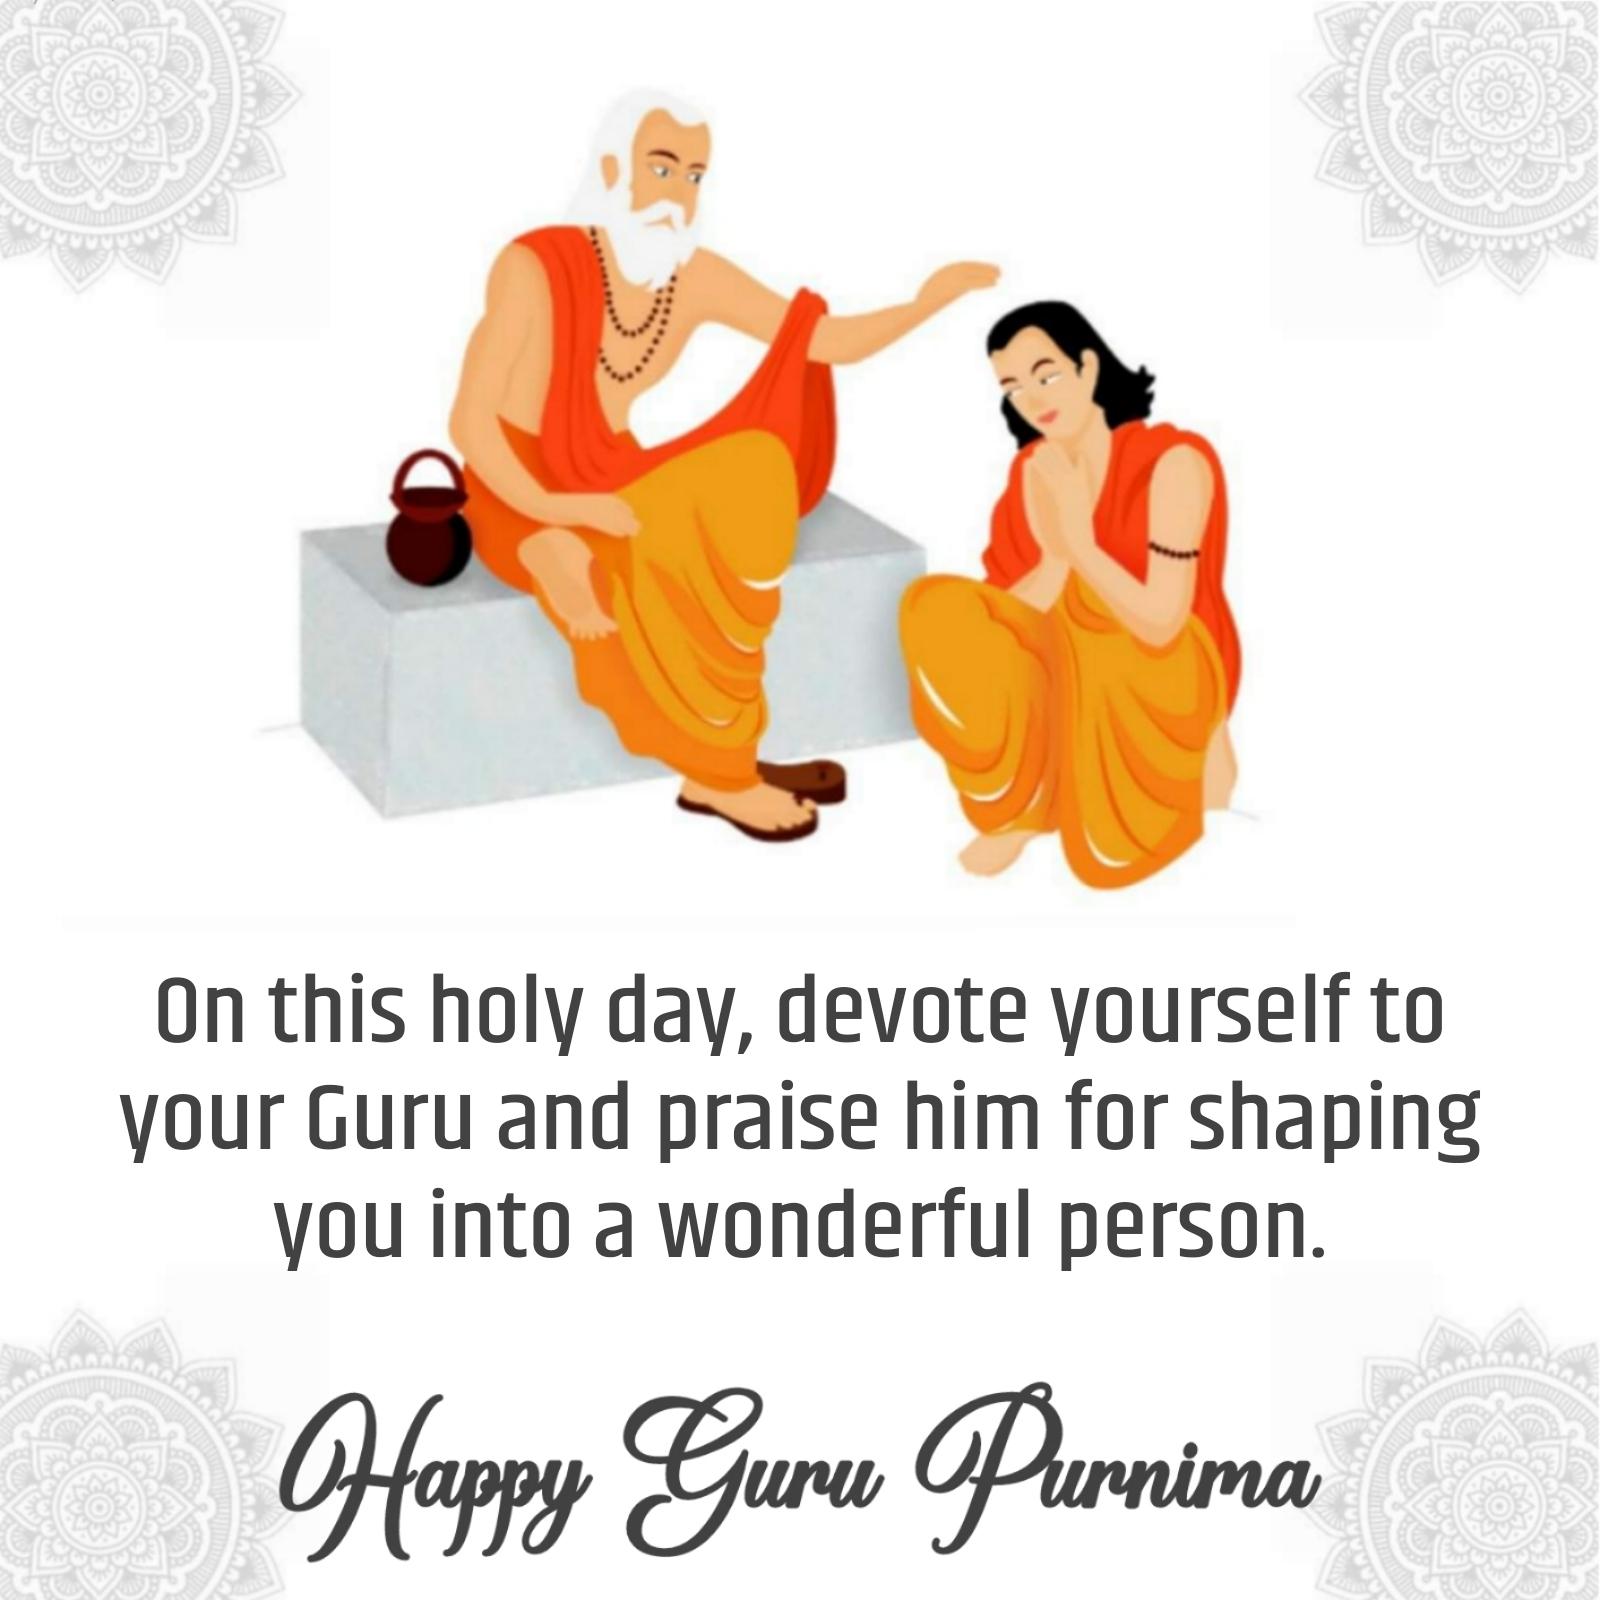 On this holy day devote yourself to your Guru and praise him